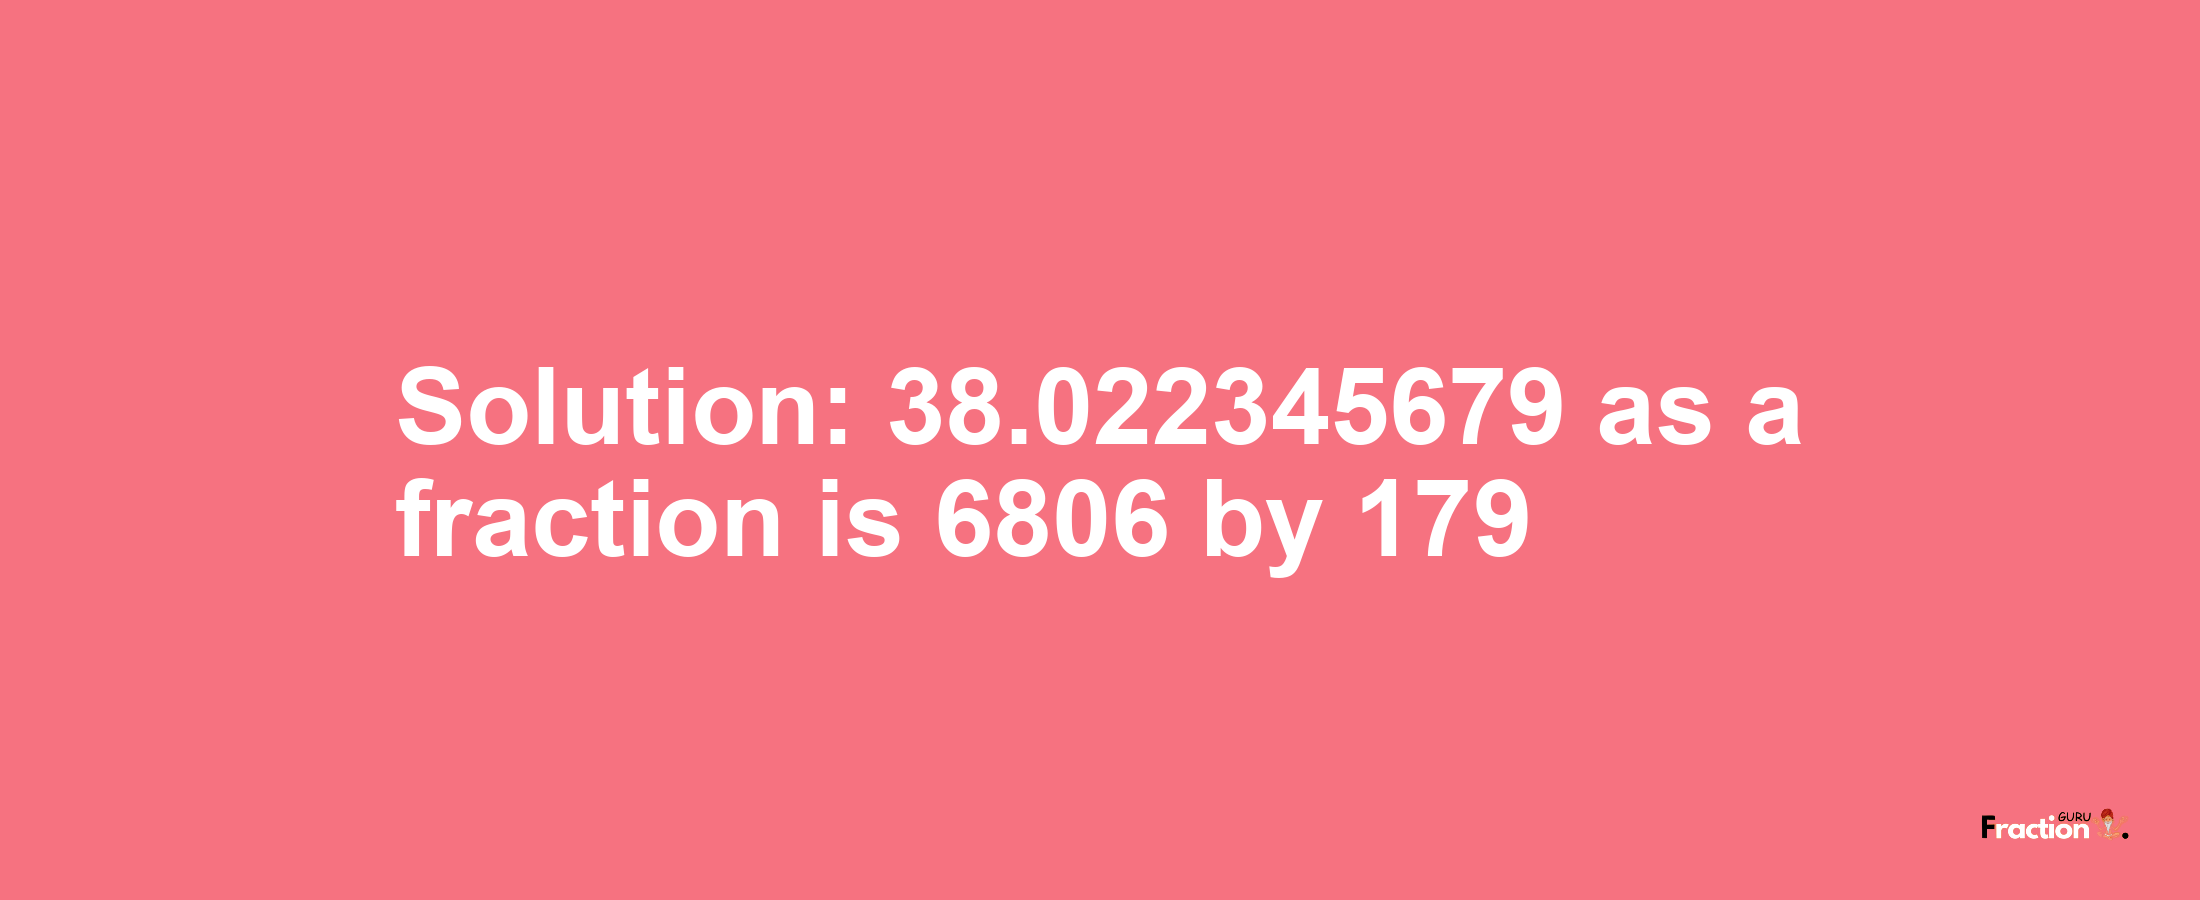 Solution:38.022345679 as a fraction is 6806/179